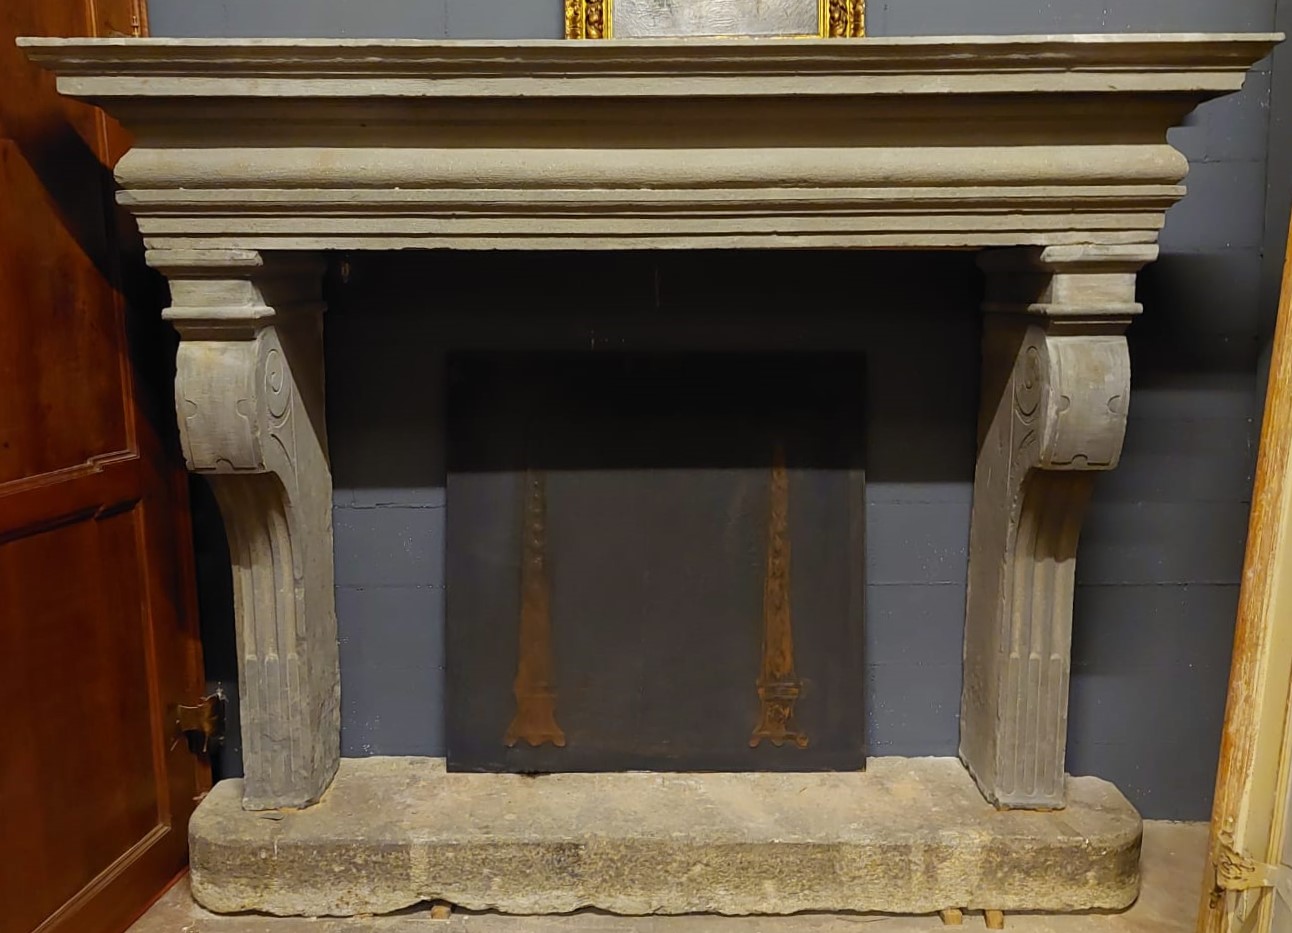 chp349 - fireplace in Serena stone, period '5 /' 600, measures cm w 219 x h 177 